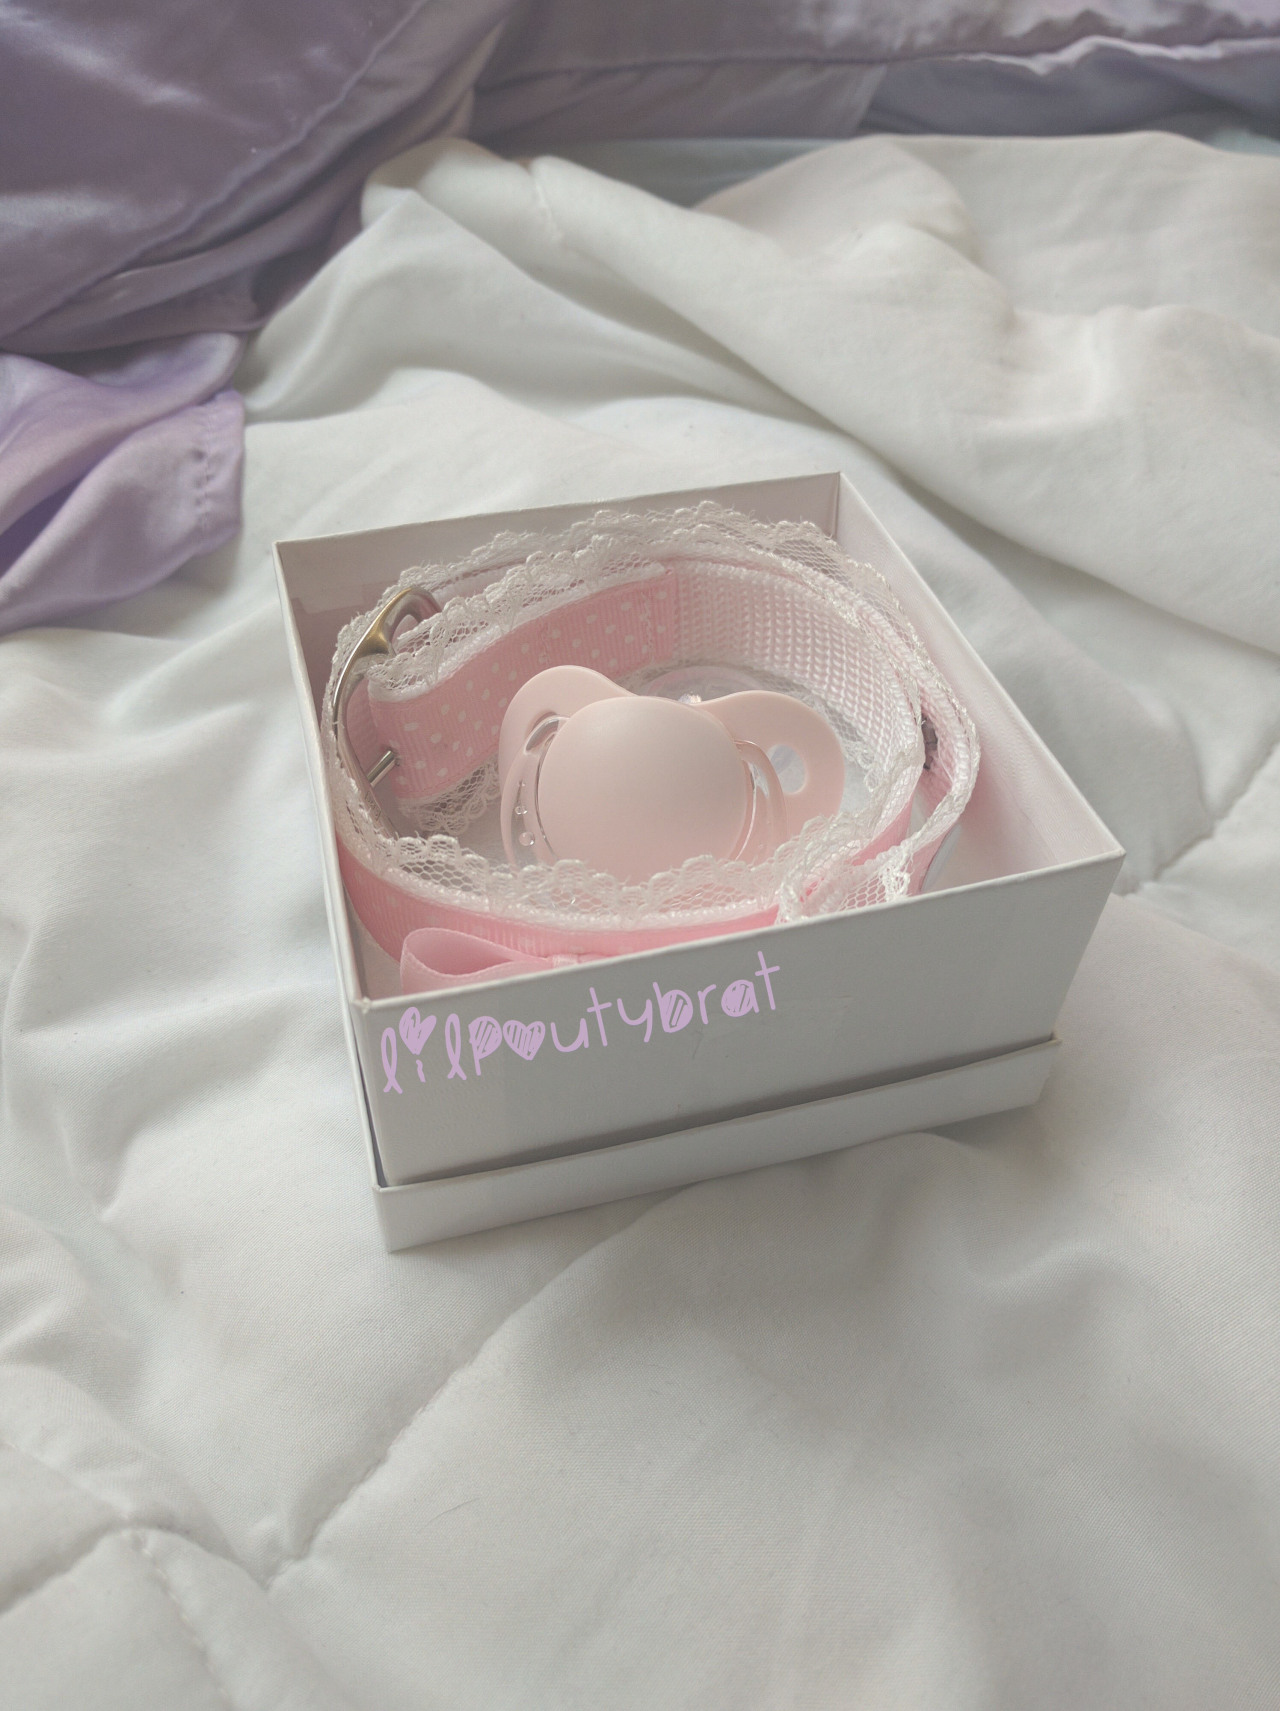 lilpoutybrat:  my binky and my collar stay in this little box when I’m away 💗